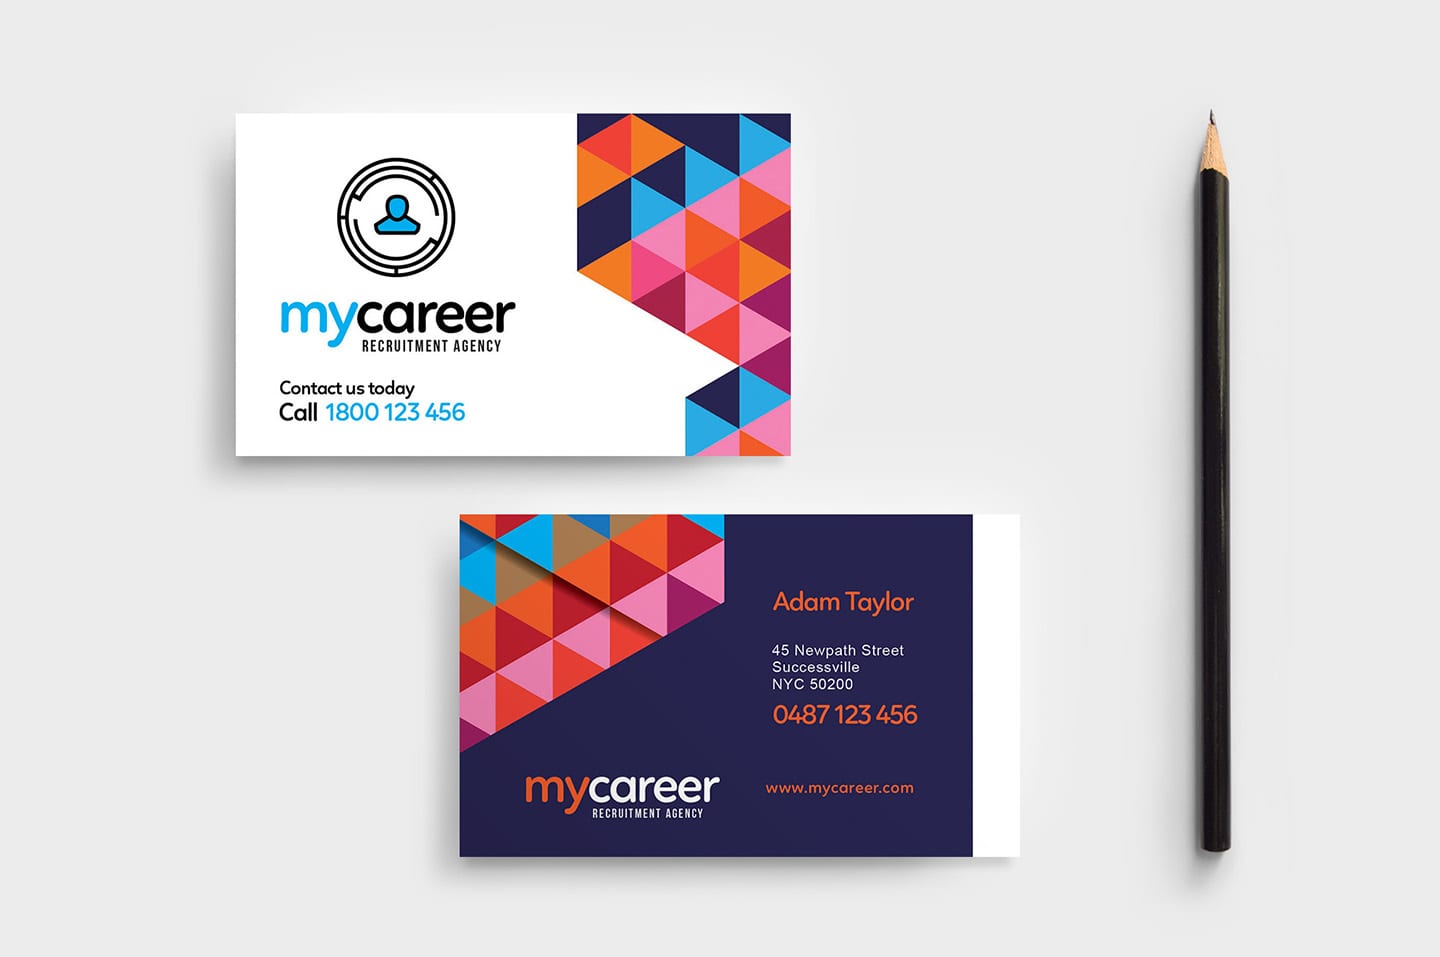 Recruitment Agency Business Card Template in PSD, Ai & Vector Within Business Card Size Template Photoshop